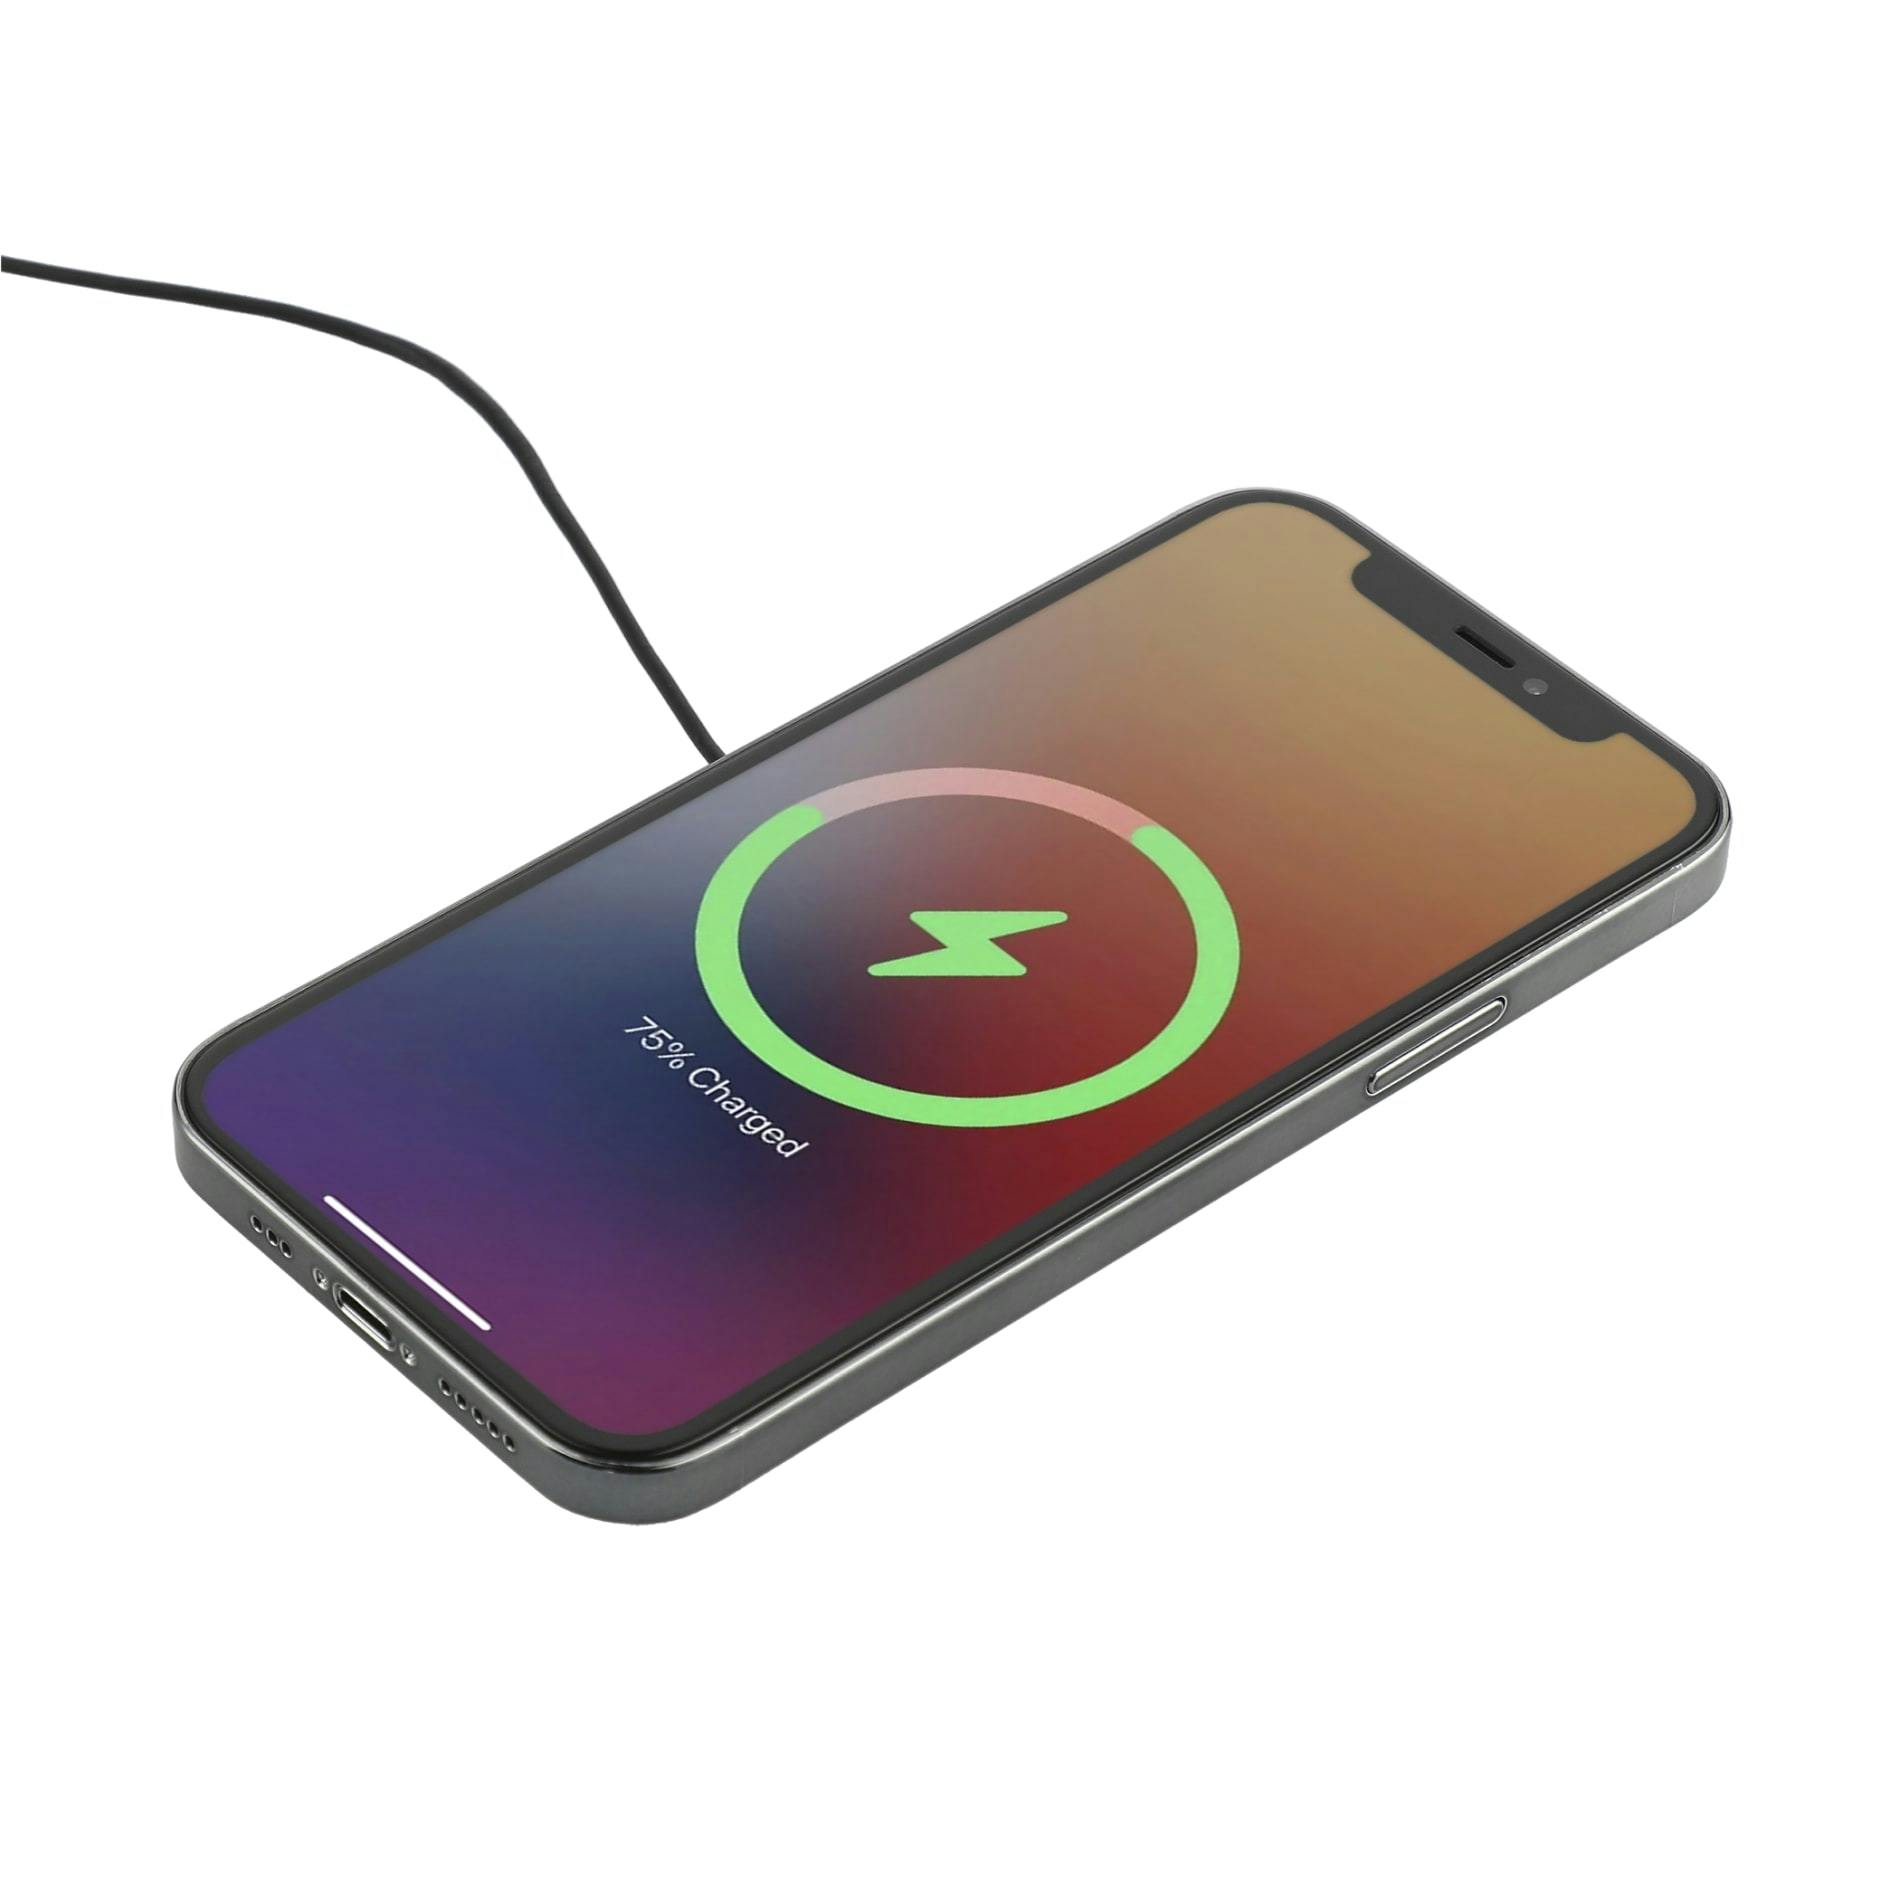 MagClick® Fast Wireless Charging Pad - additional Image 1